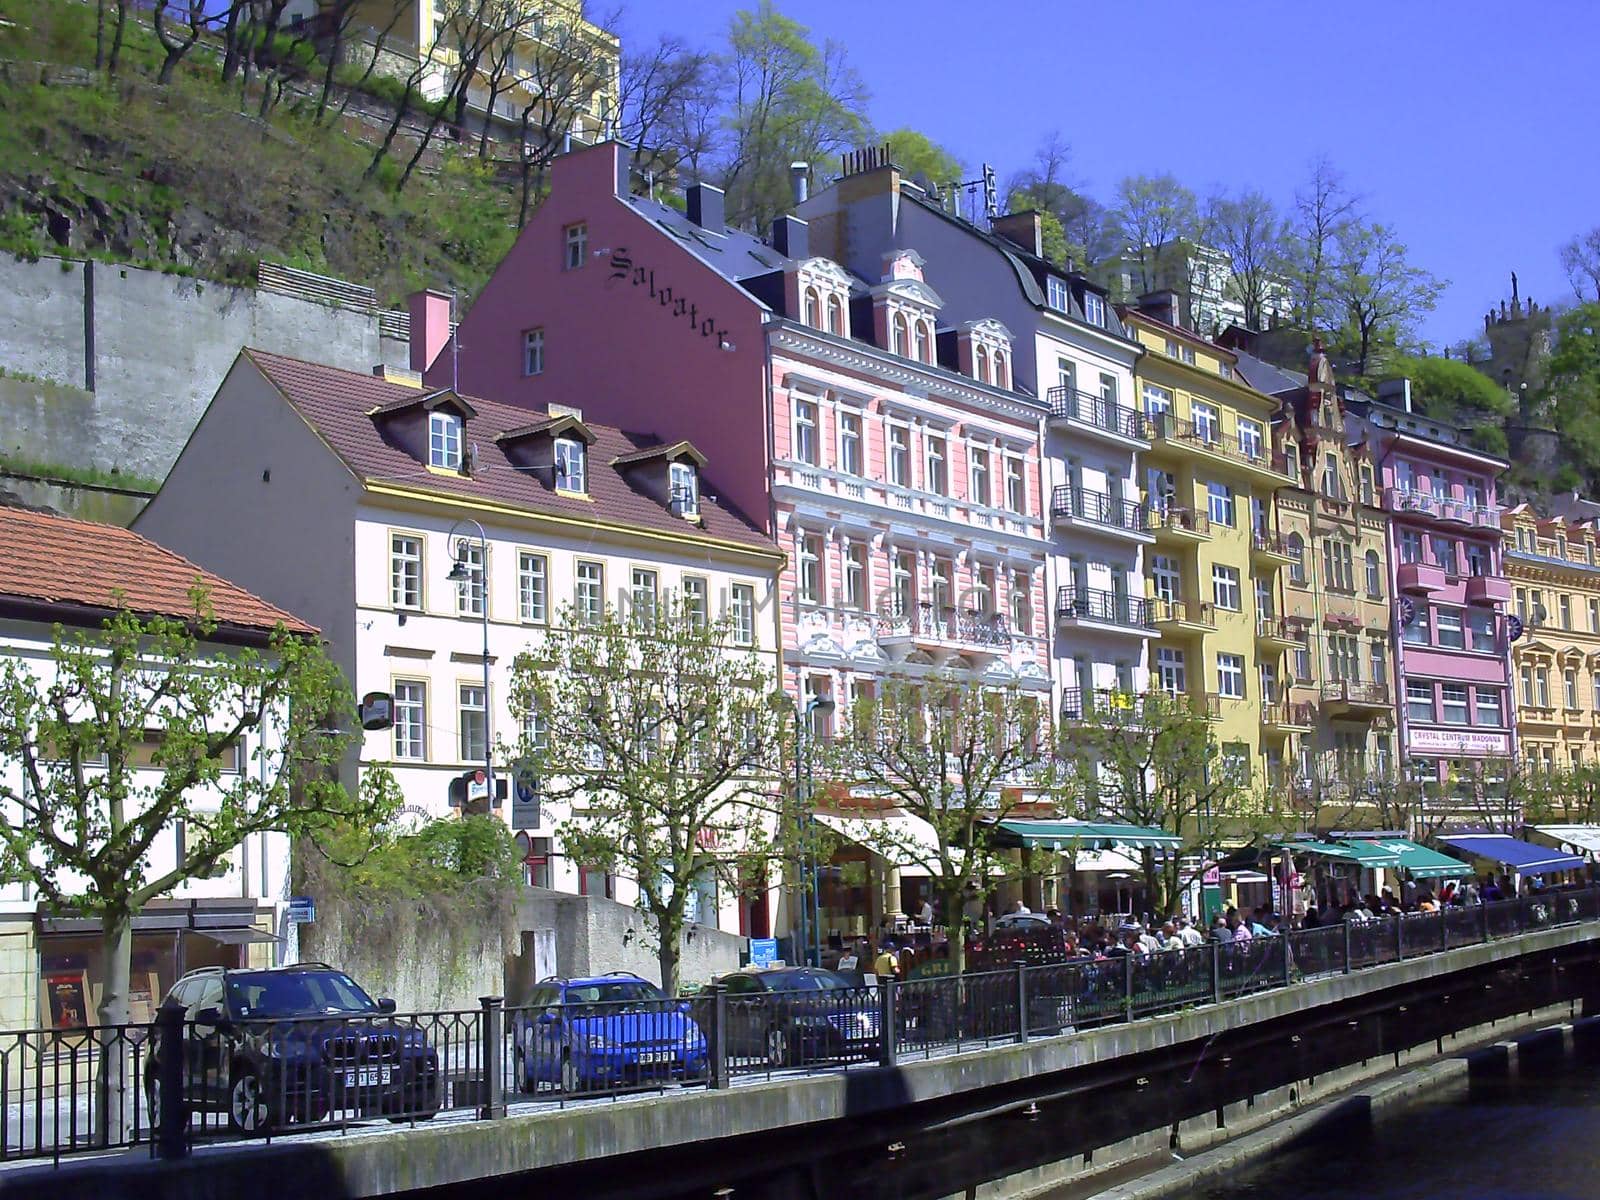 Houses in city center of Karlovy Vary. Beautiful buildings from traditional town of Karlovy Vary, Czech Republic